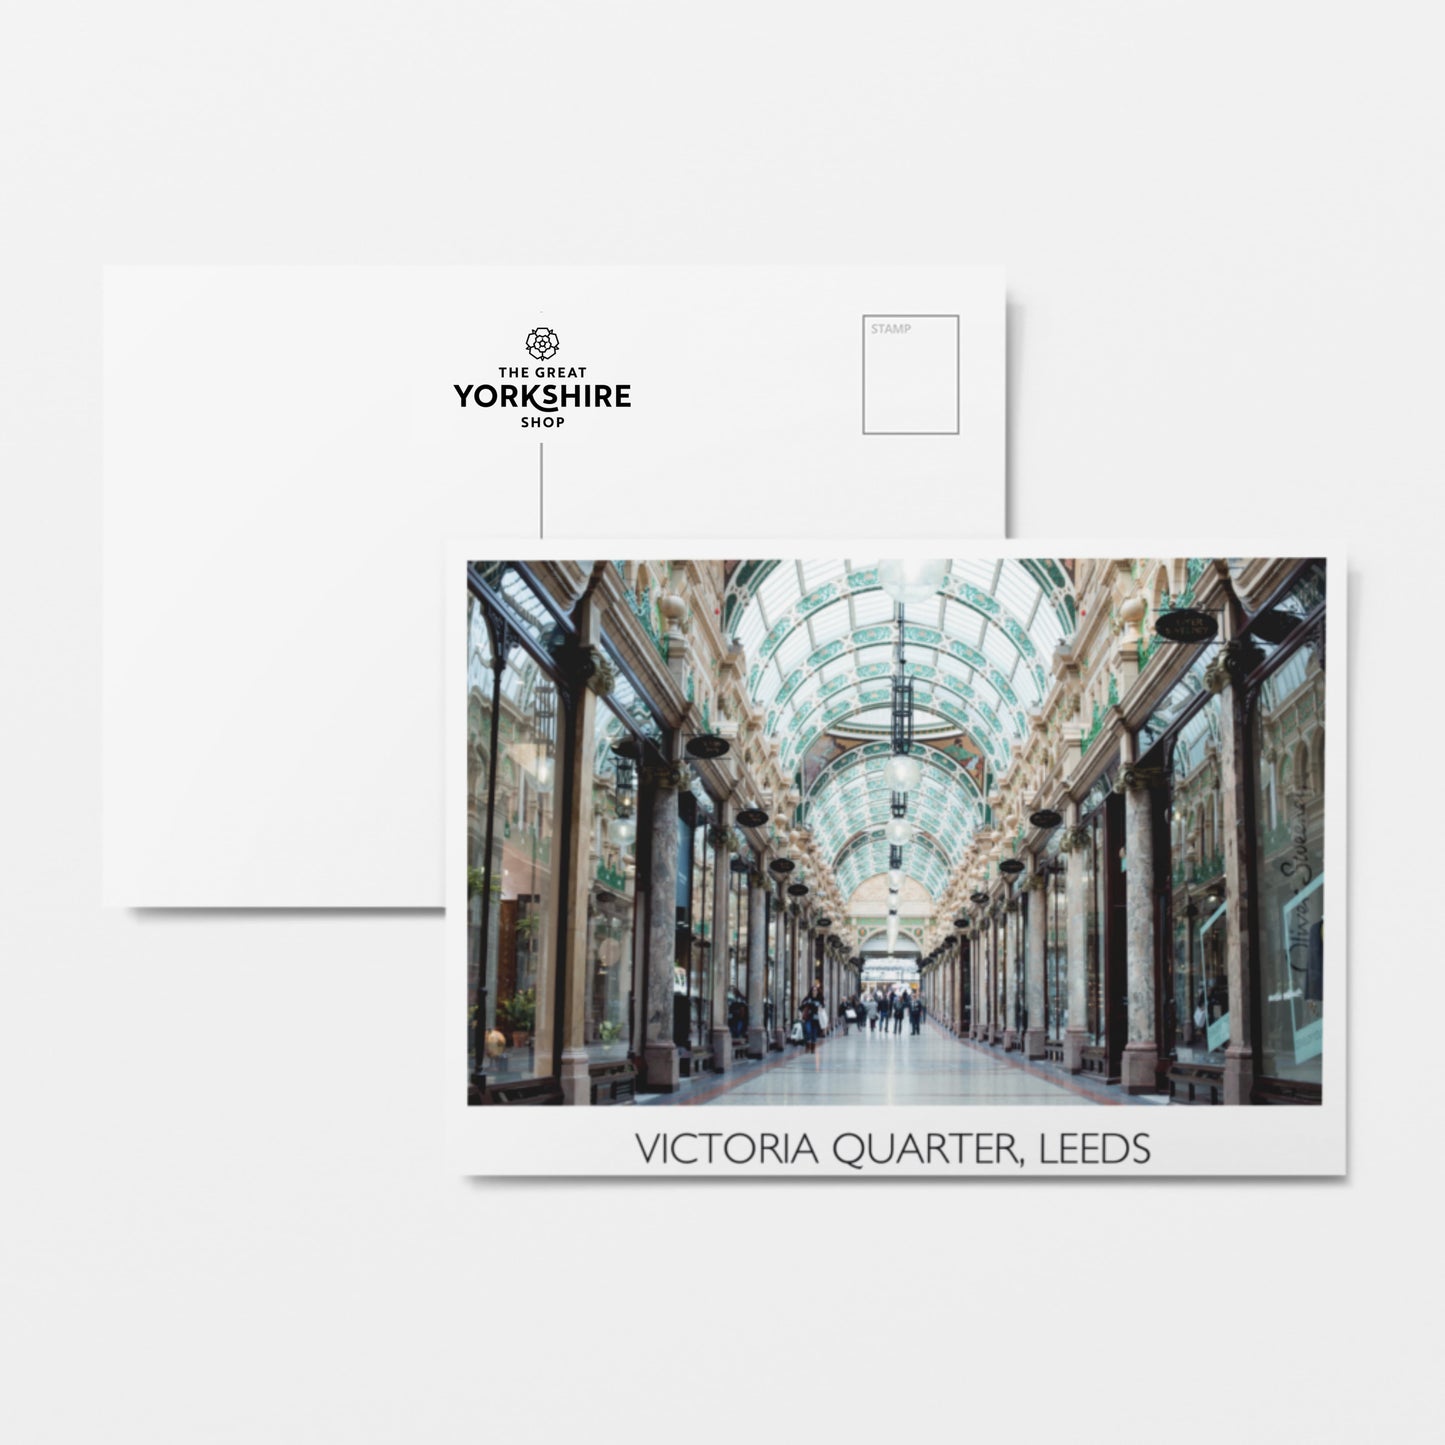 Load image into Gallery viewer, County Arcade Victoria Quarter Leeds Post Card - The Great Yorkshire Shop
